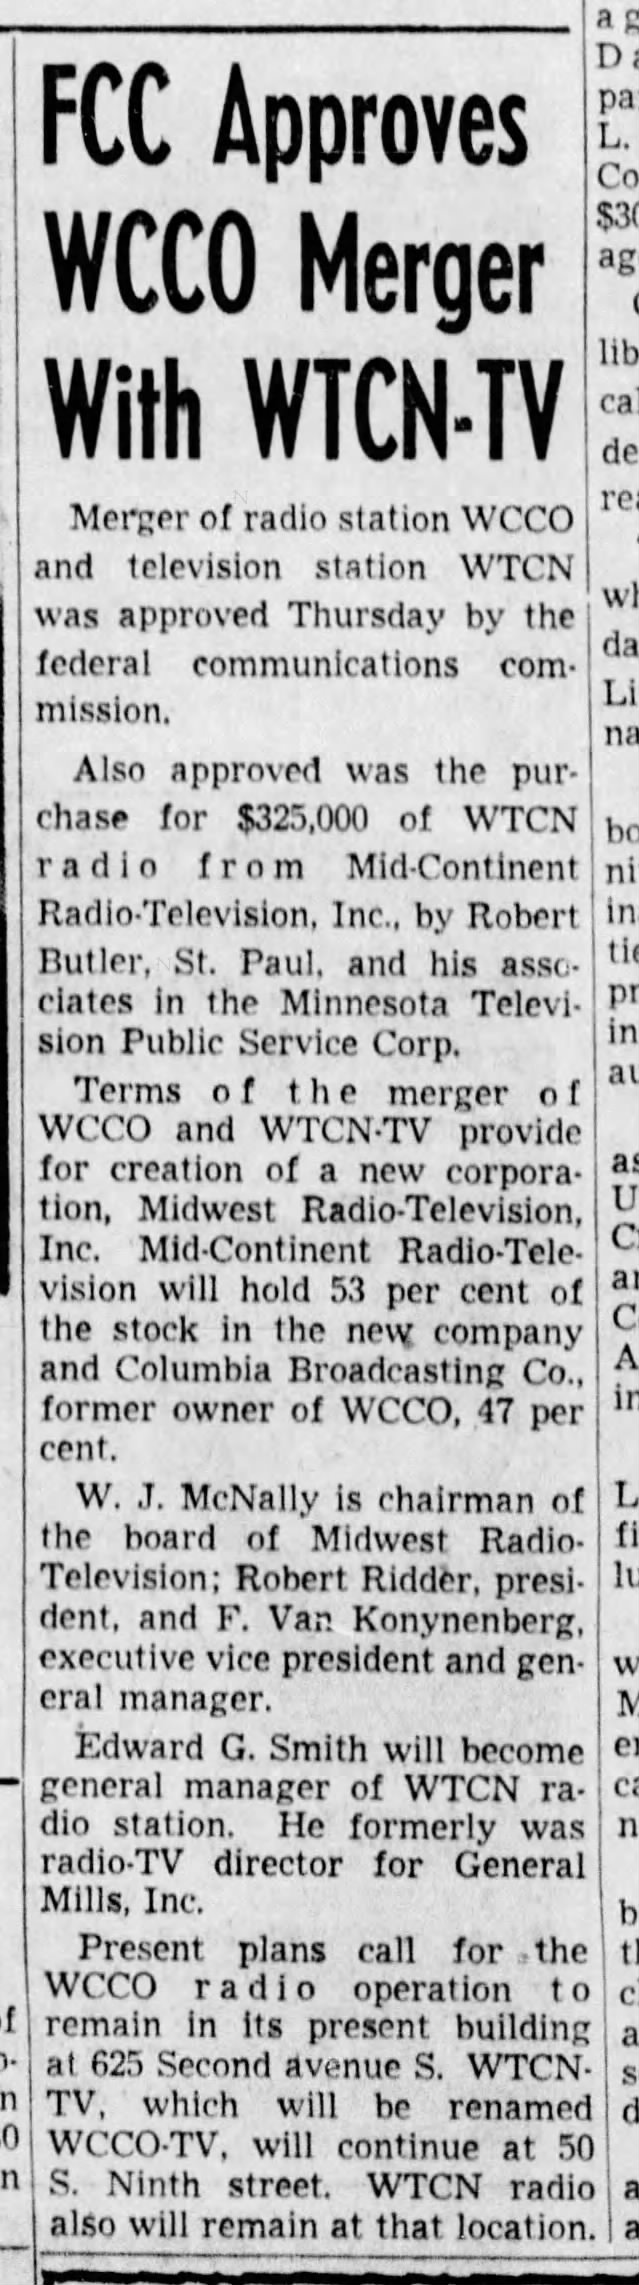 FCC Approves WCCO Merger With WTCN-TV